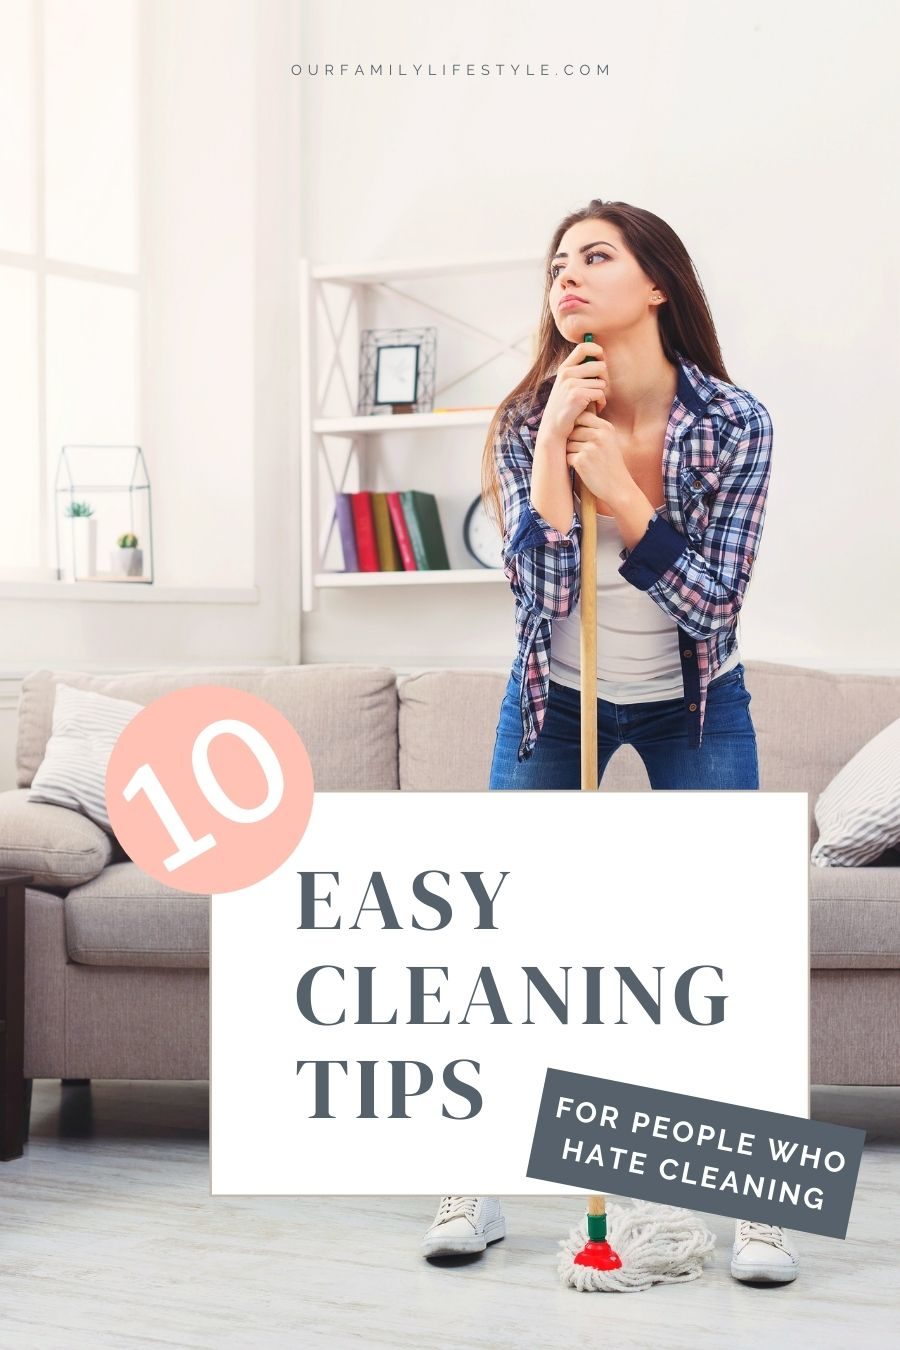 10 Easy Cleaning Tips for People Who Hate Cleaning